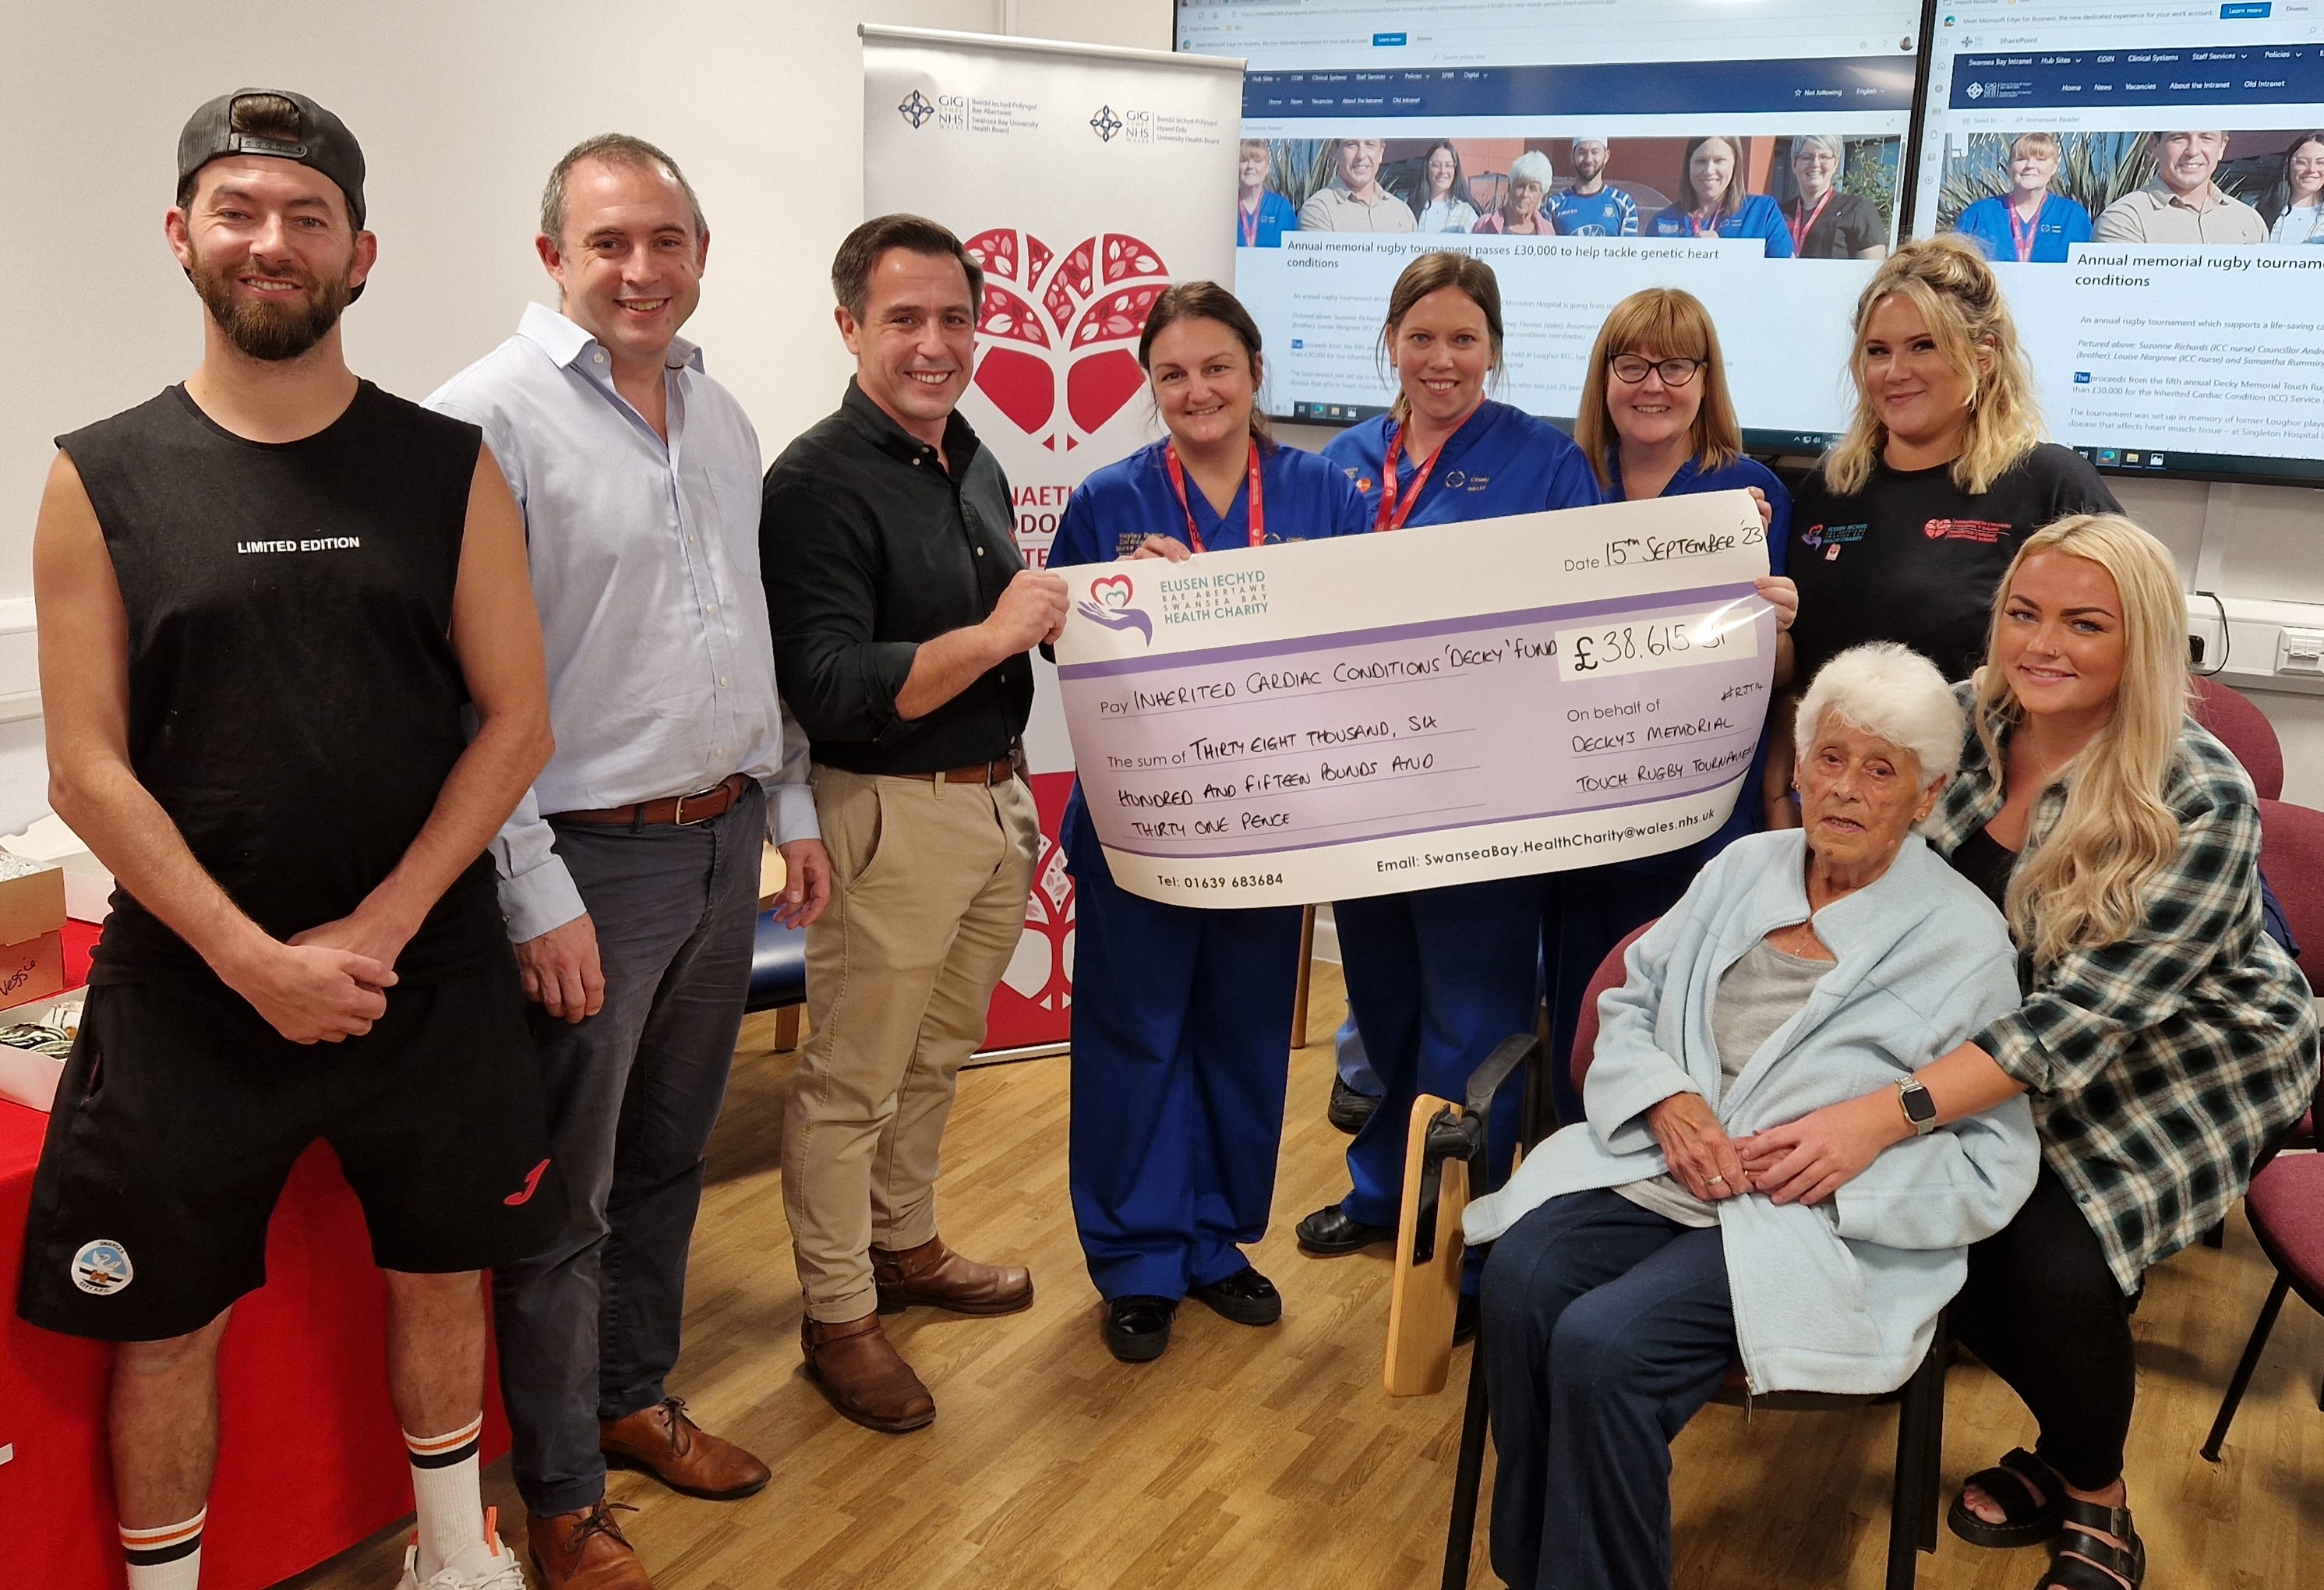 Jason Thomas, Dr Carey Edwards, Councillor Andrew Stevens, Inherited Cardiac Conditions (ICC) nurse Hayley Brown, ICC nurse Louise Norgrove, ICC nurse Suzanne Richards, and Katy Phillips, (seated) grandmother Rosamond Thomas and sister Tiffany Thomas.